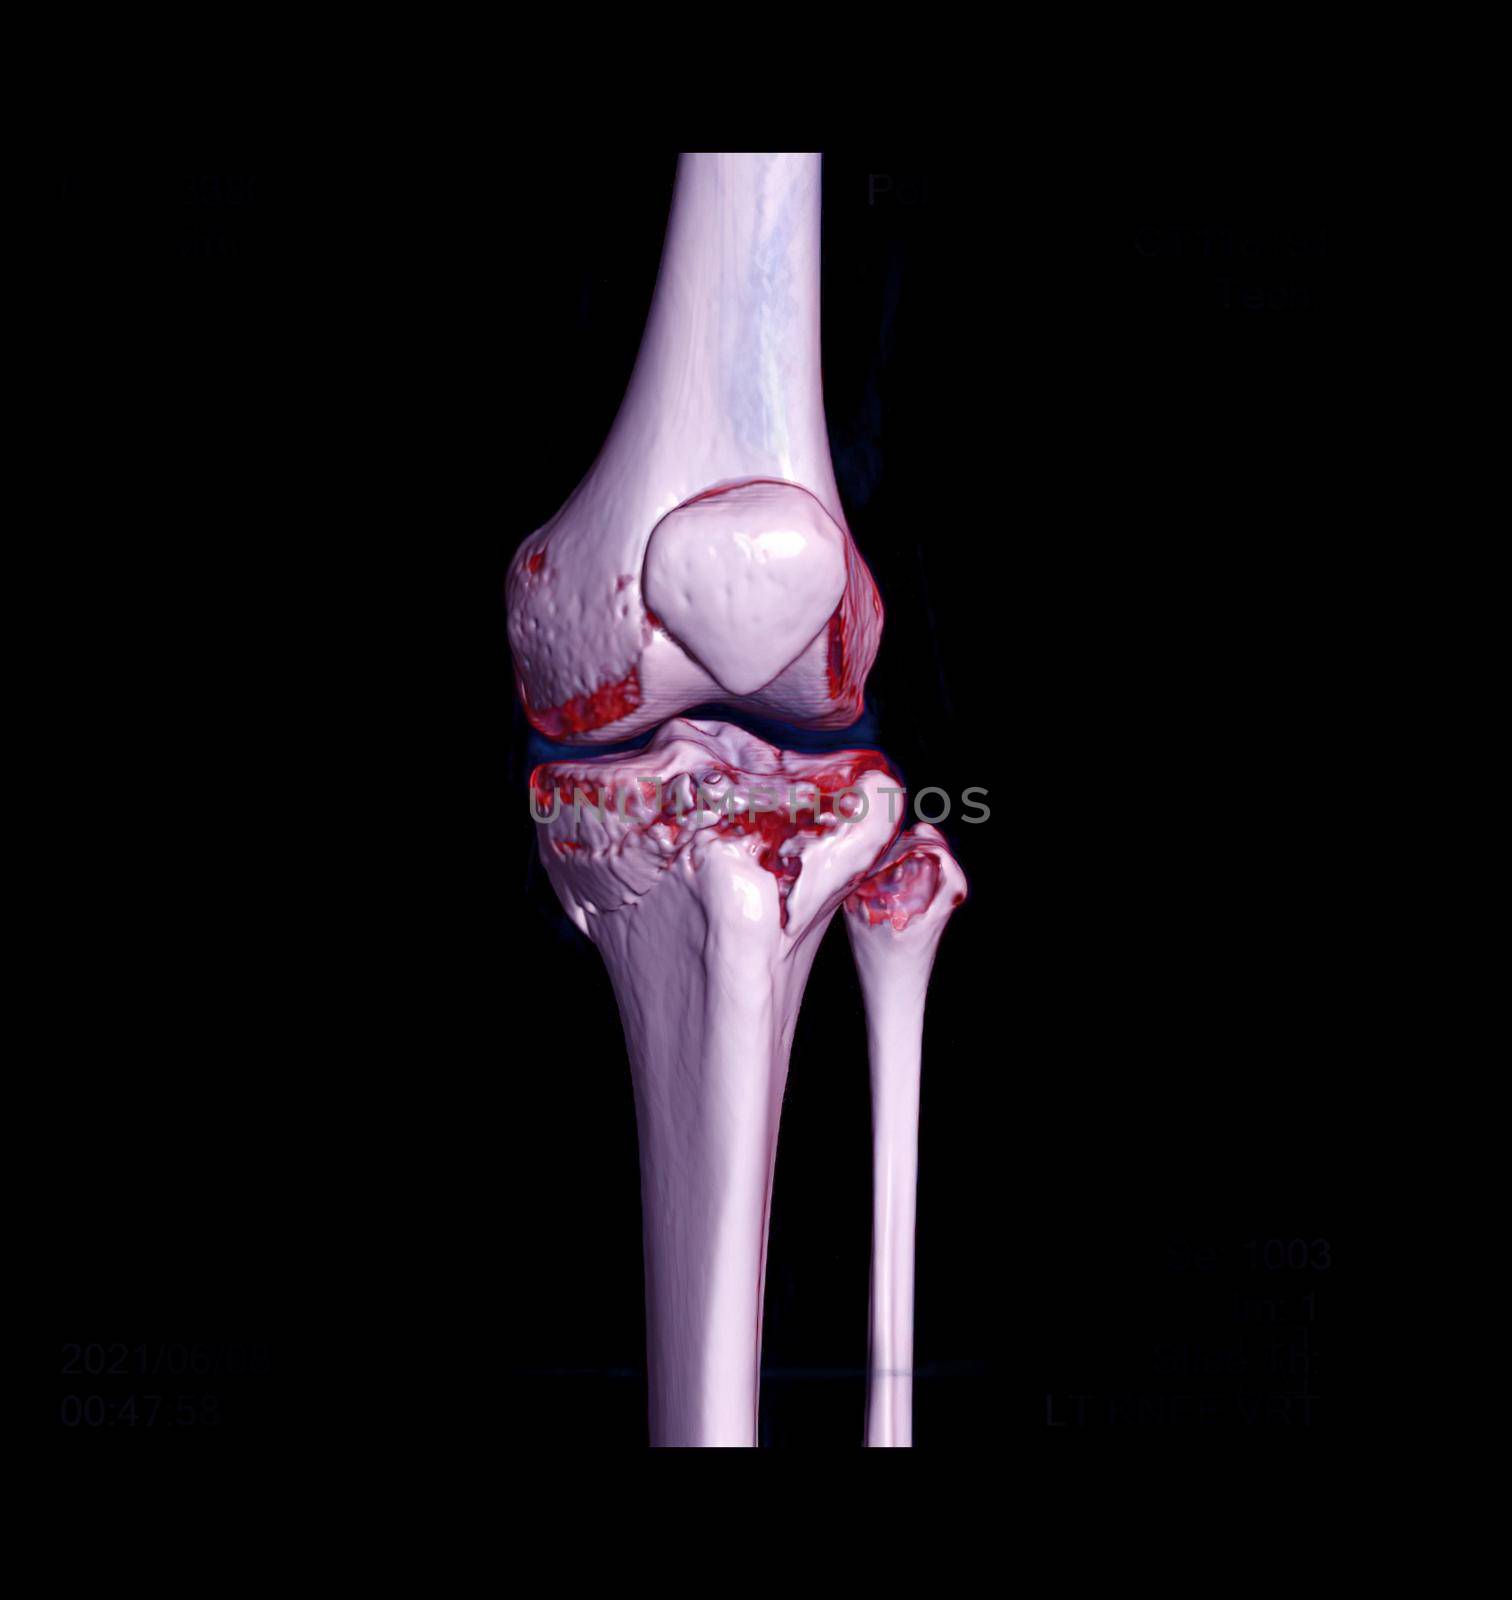 CT knee joint 3D rendering image showing fracture tibia bone